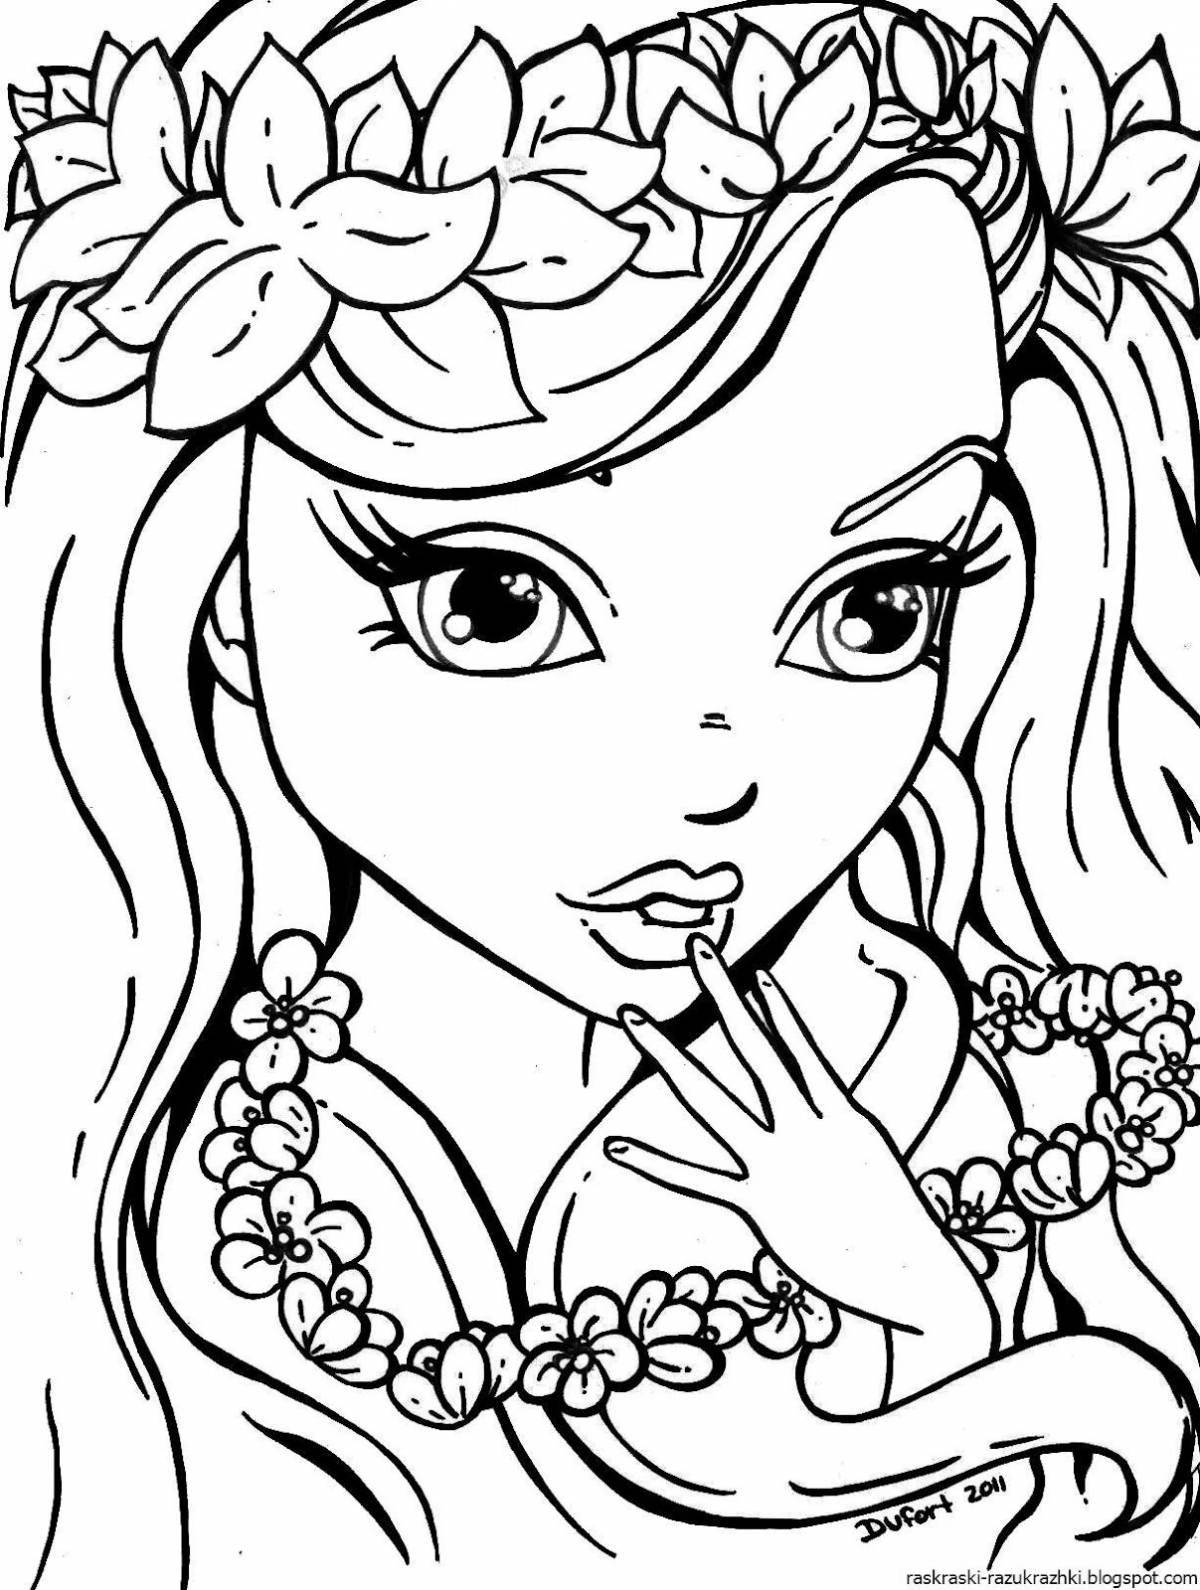 Shine coloring for girls 6 7